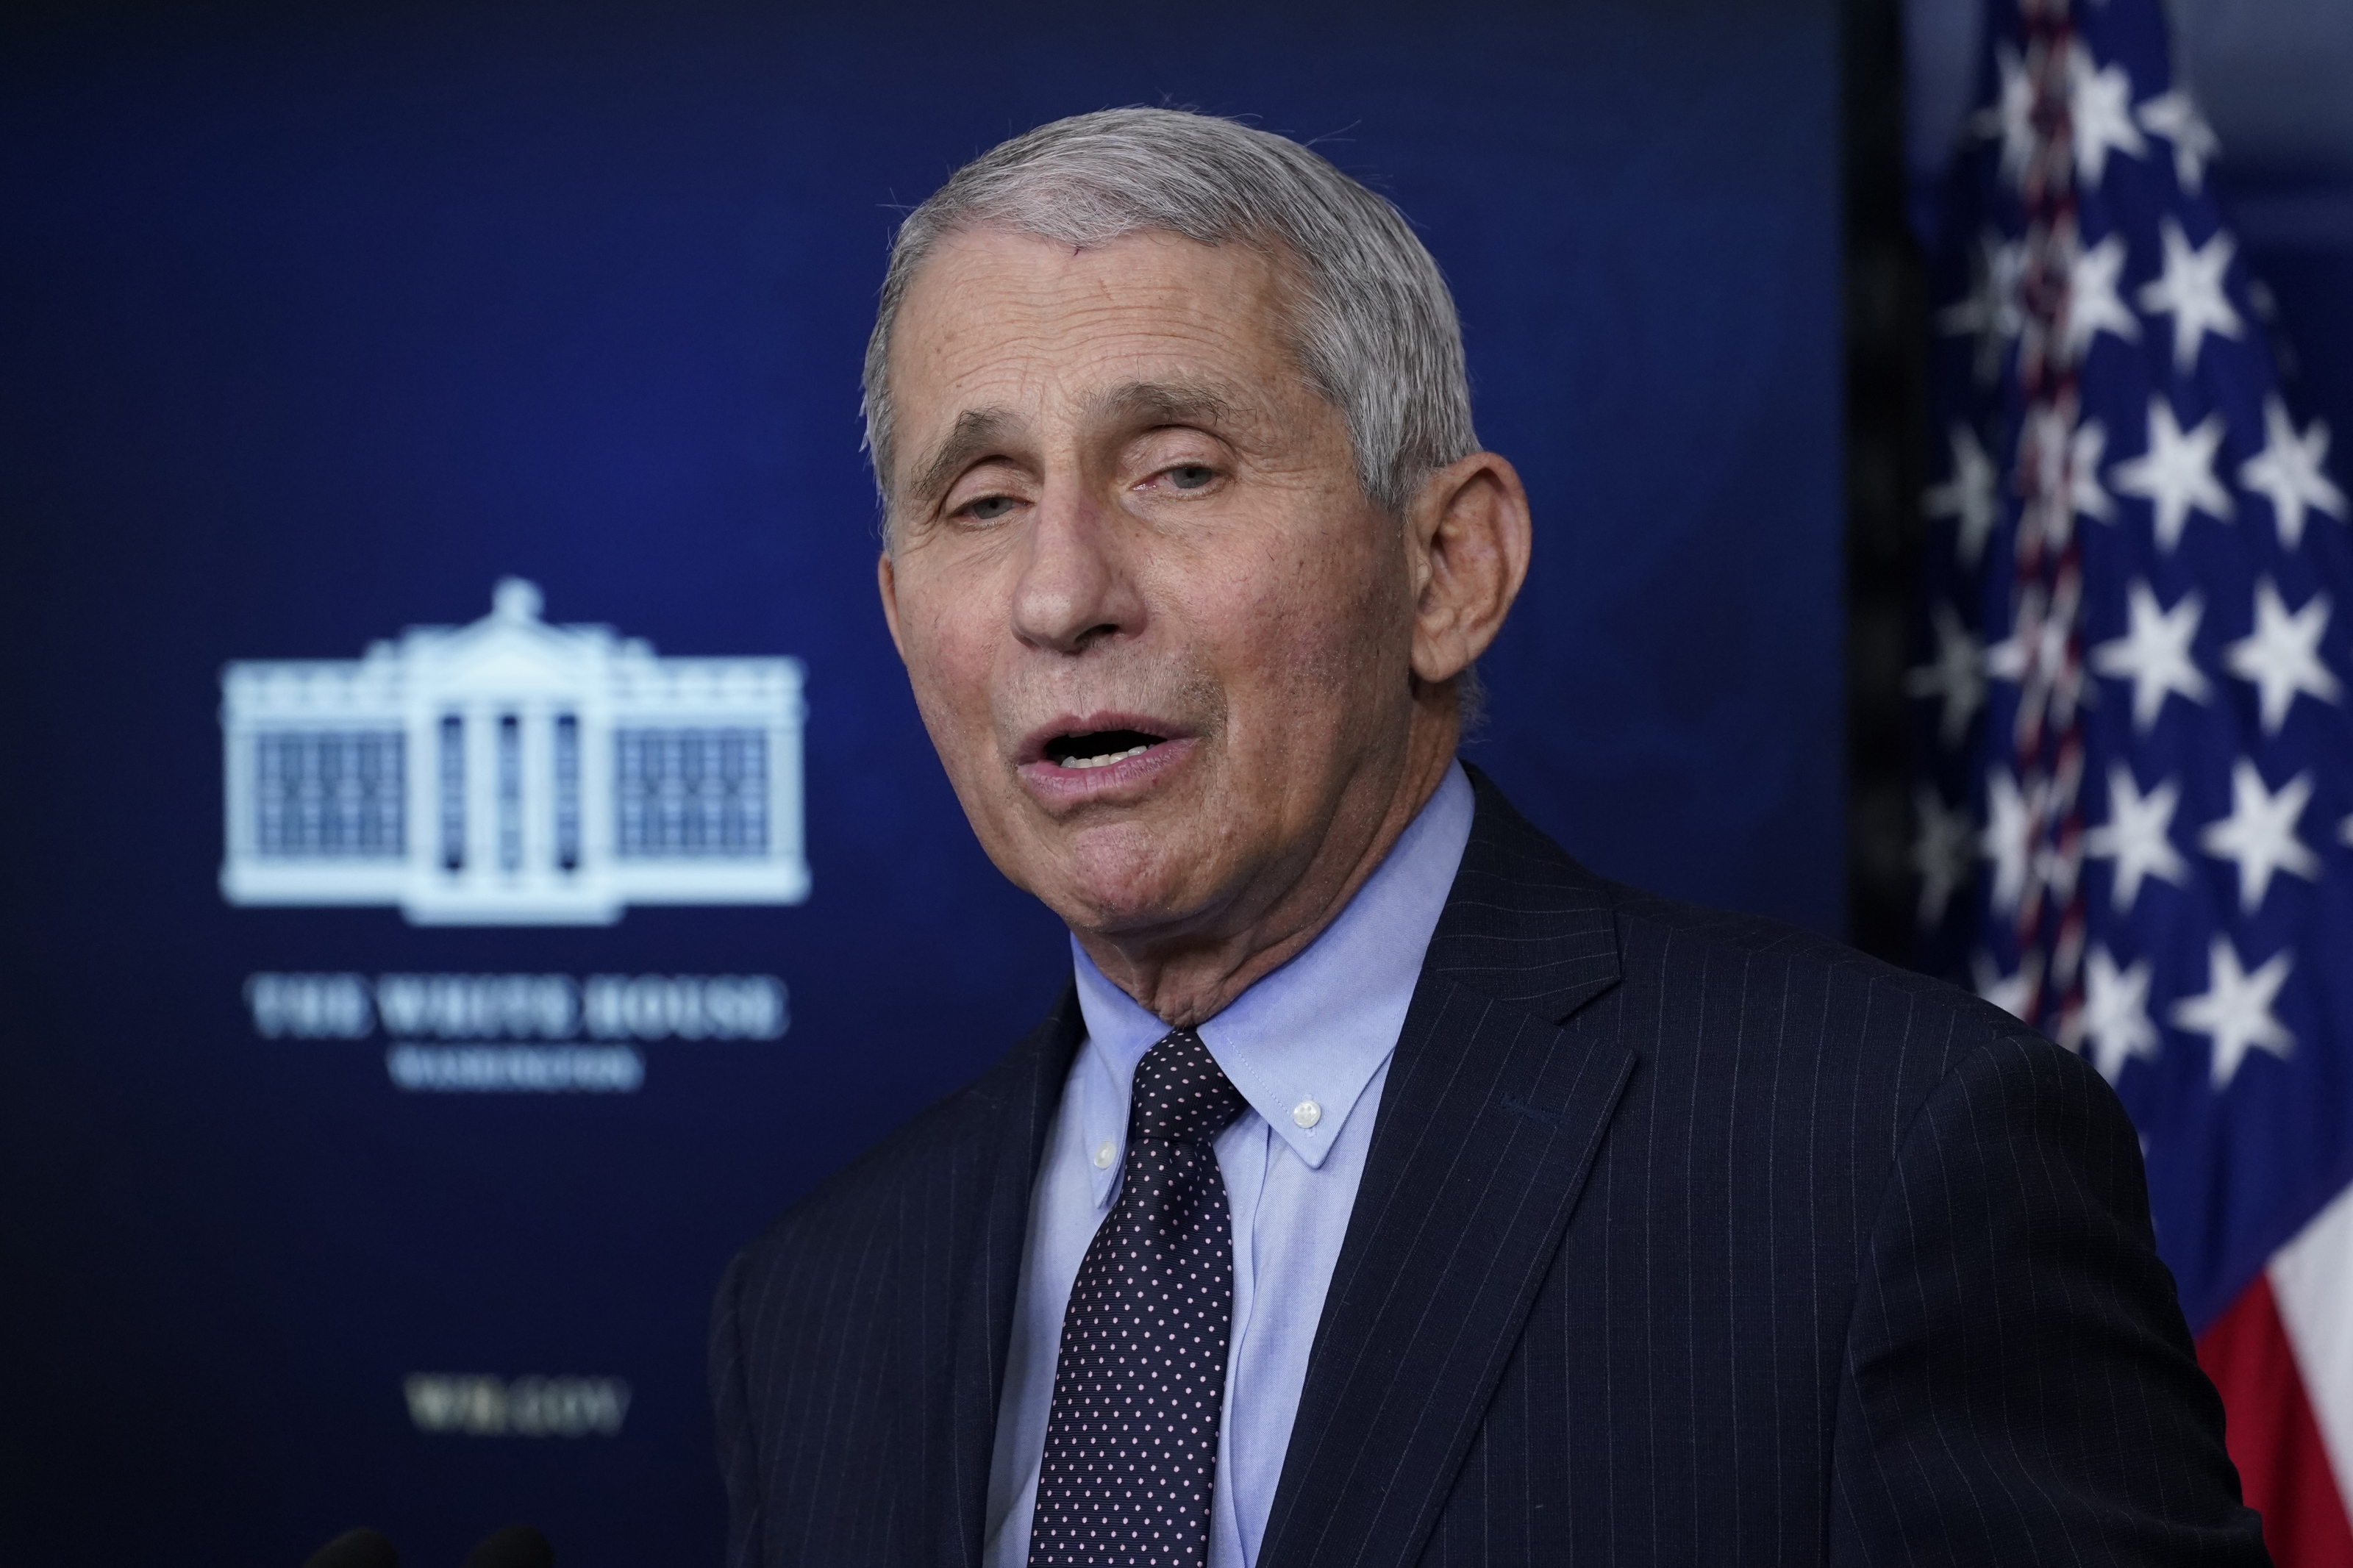 After a year of COVID-19, Fauci sees ‘light at the end of the tunnel’ |  WTOP